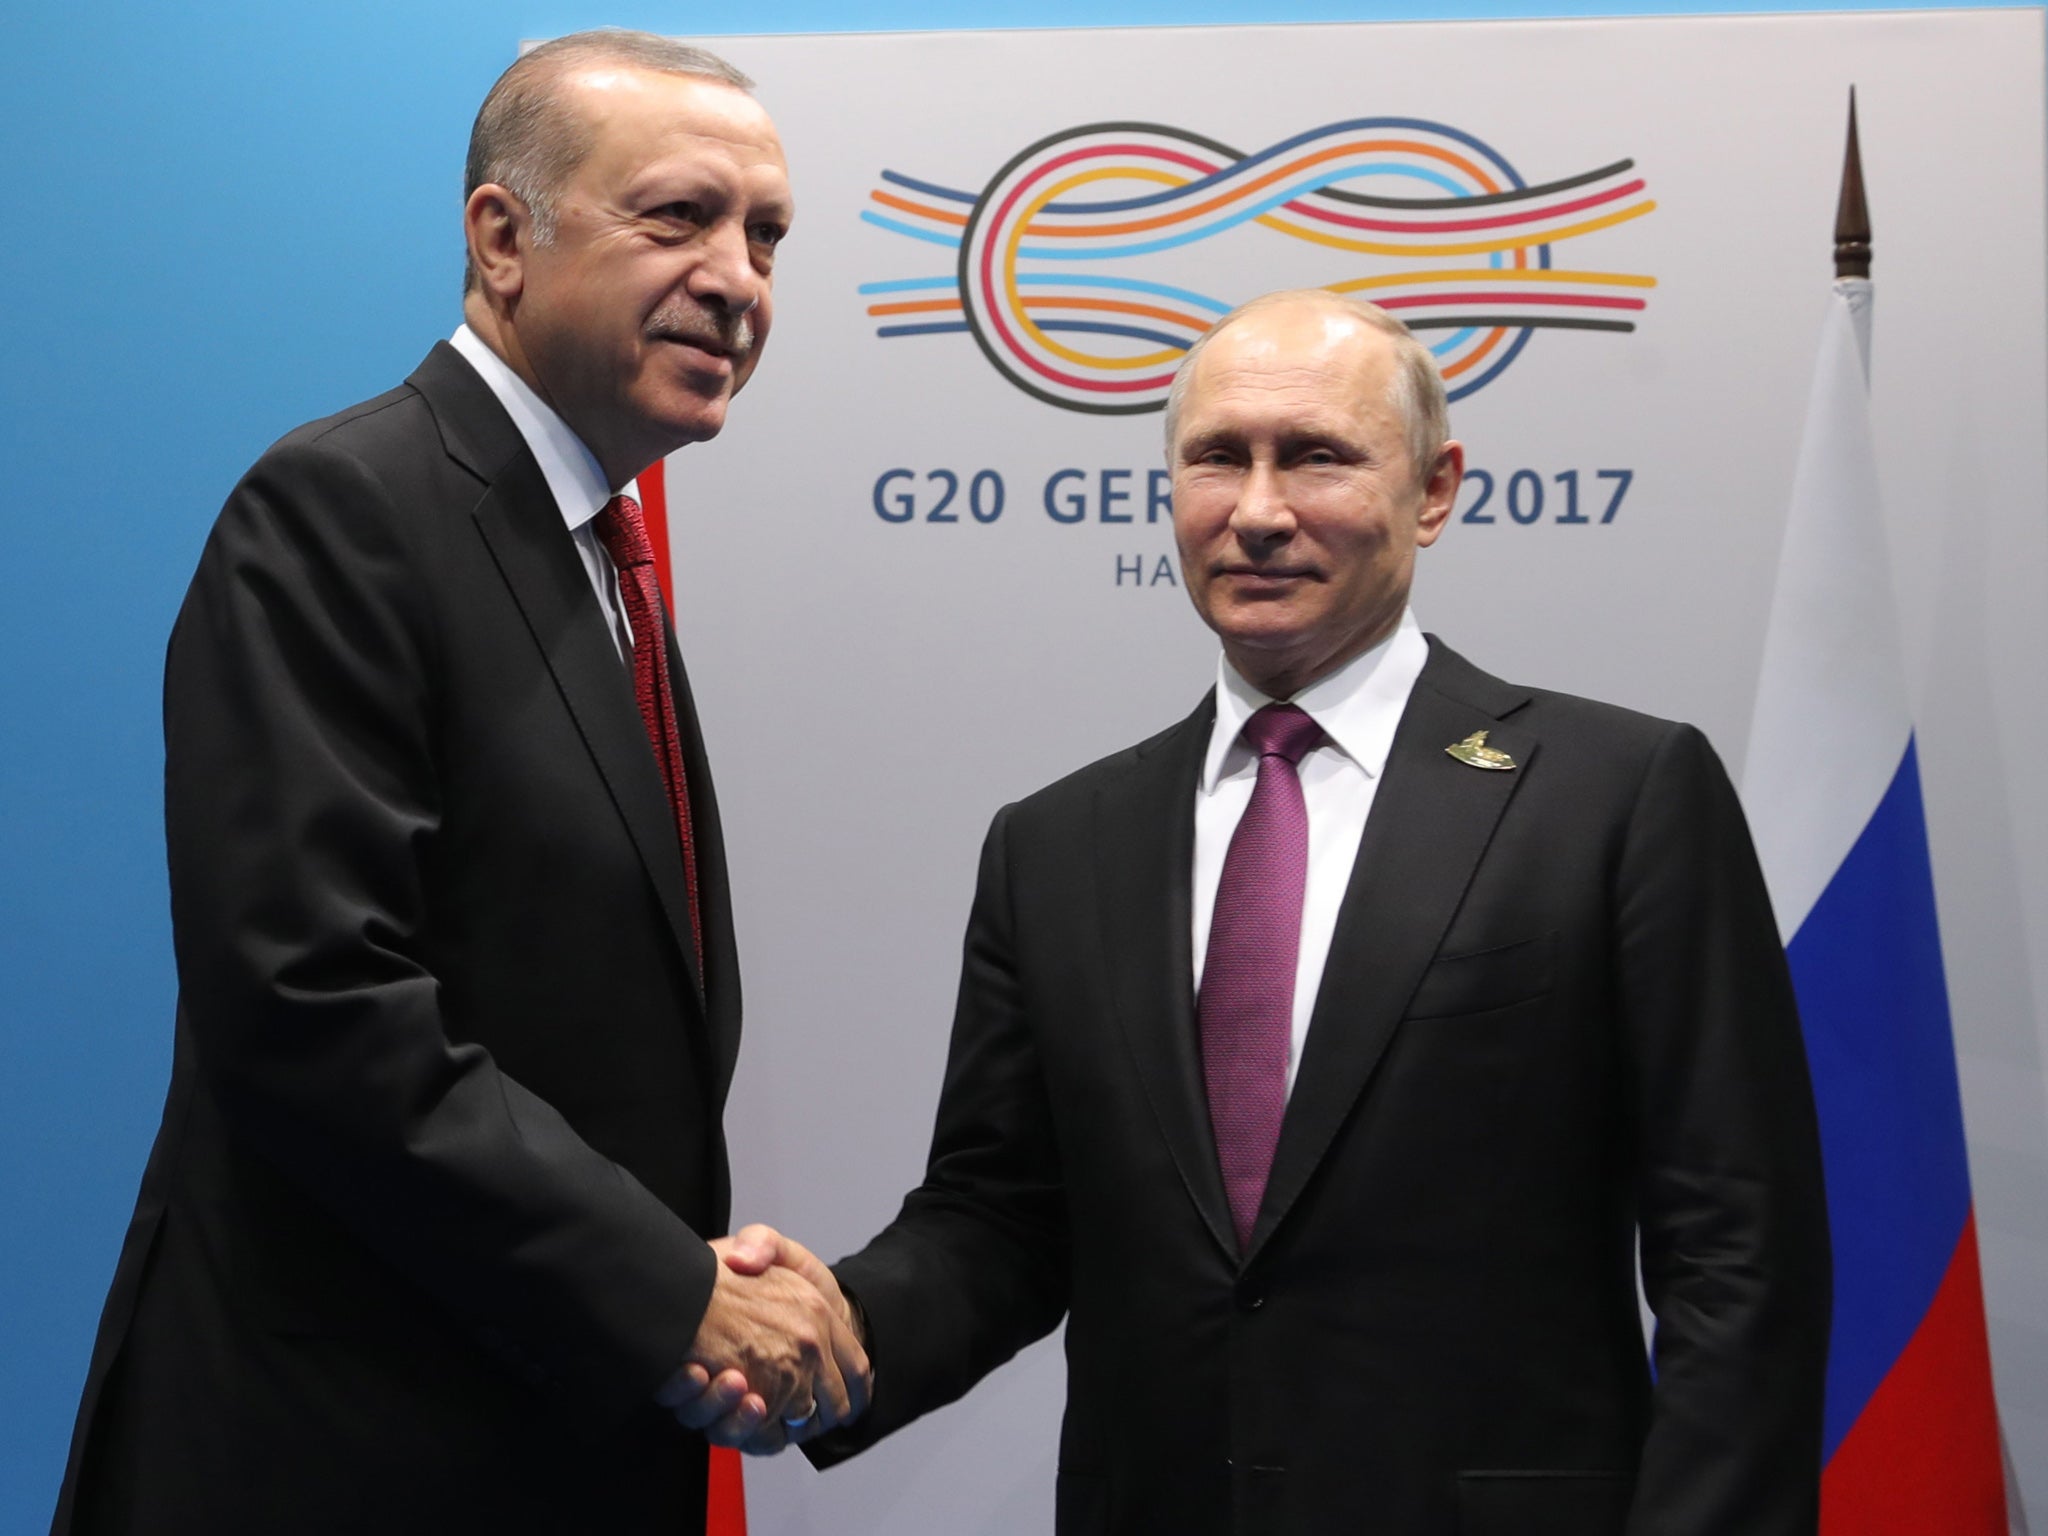 Recep Tayyip Erdogan and Vladimir Putin shake hands at the G20 summit in Germany in July. The pair have grown closer after being criticised by the West